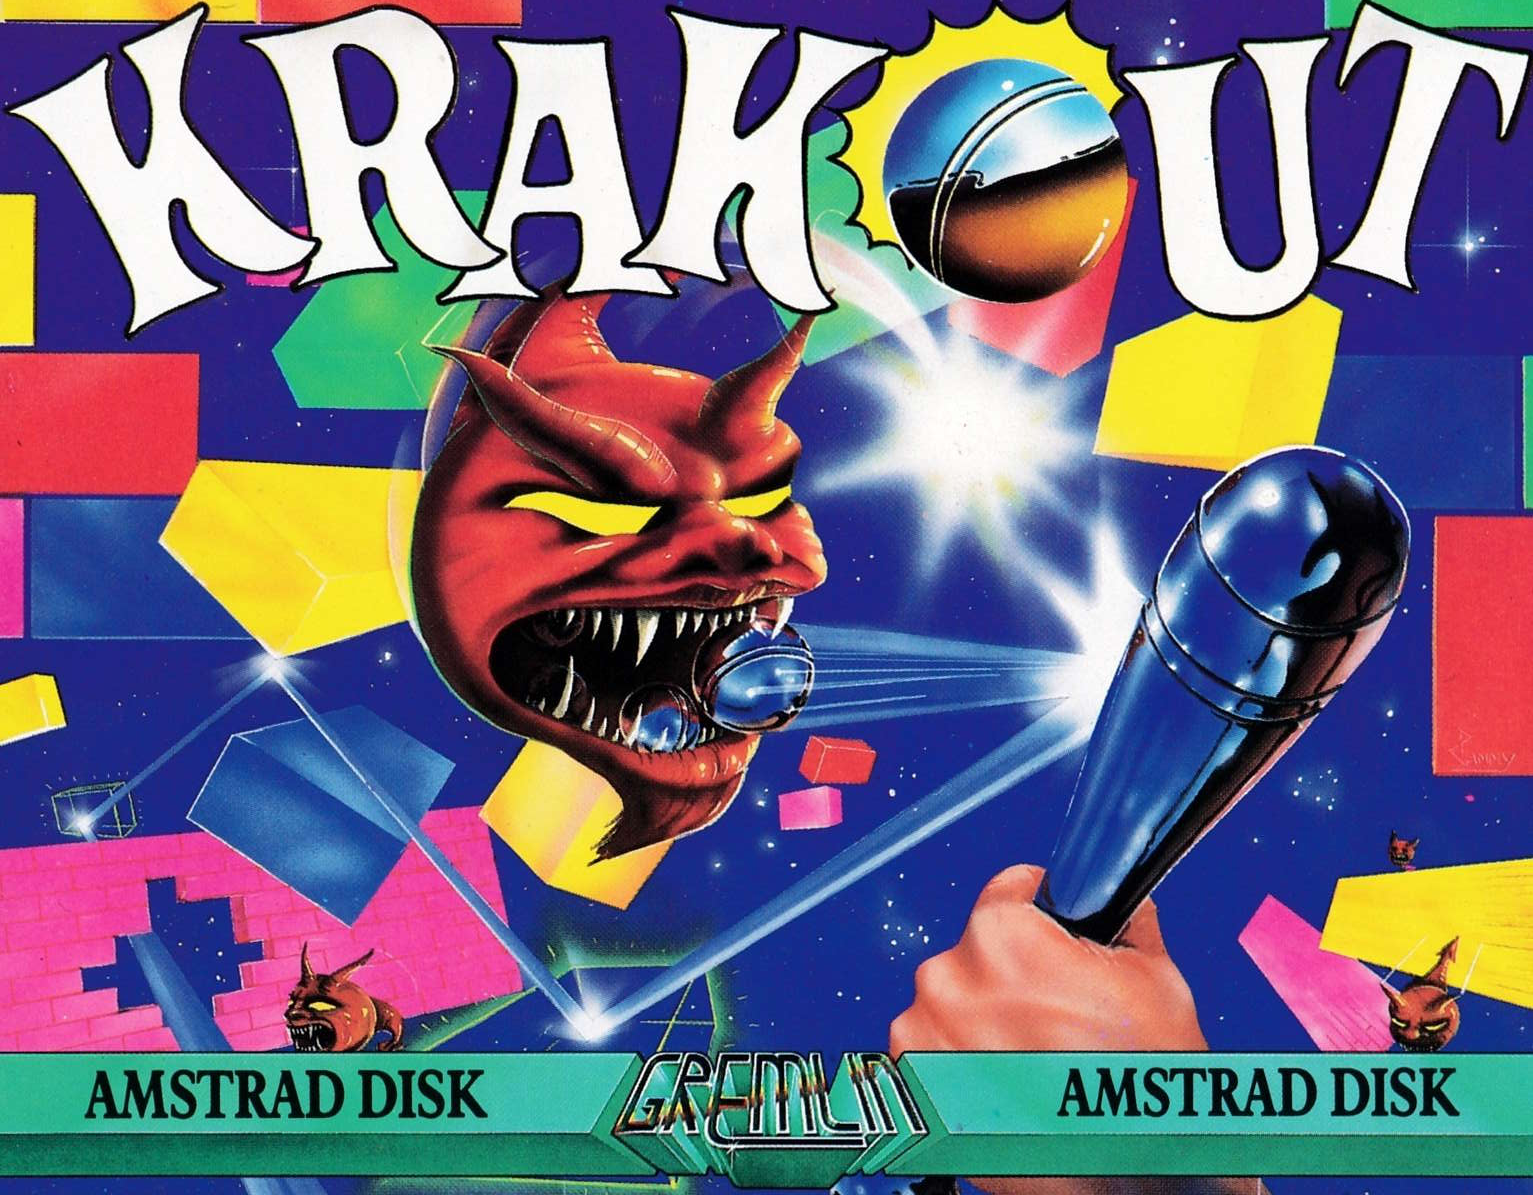 screenshot of the Amstrad CPC game Krakout by GameBase CPC